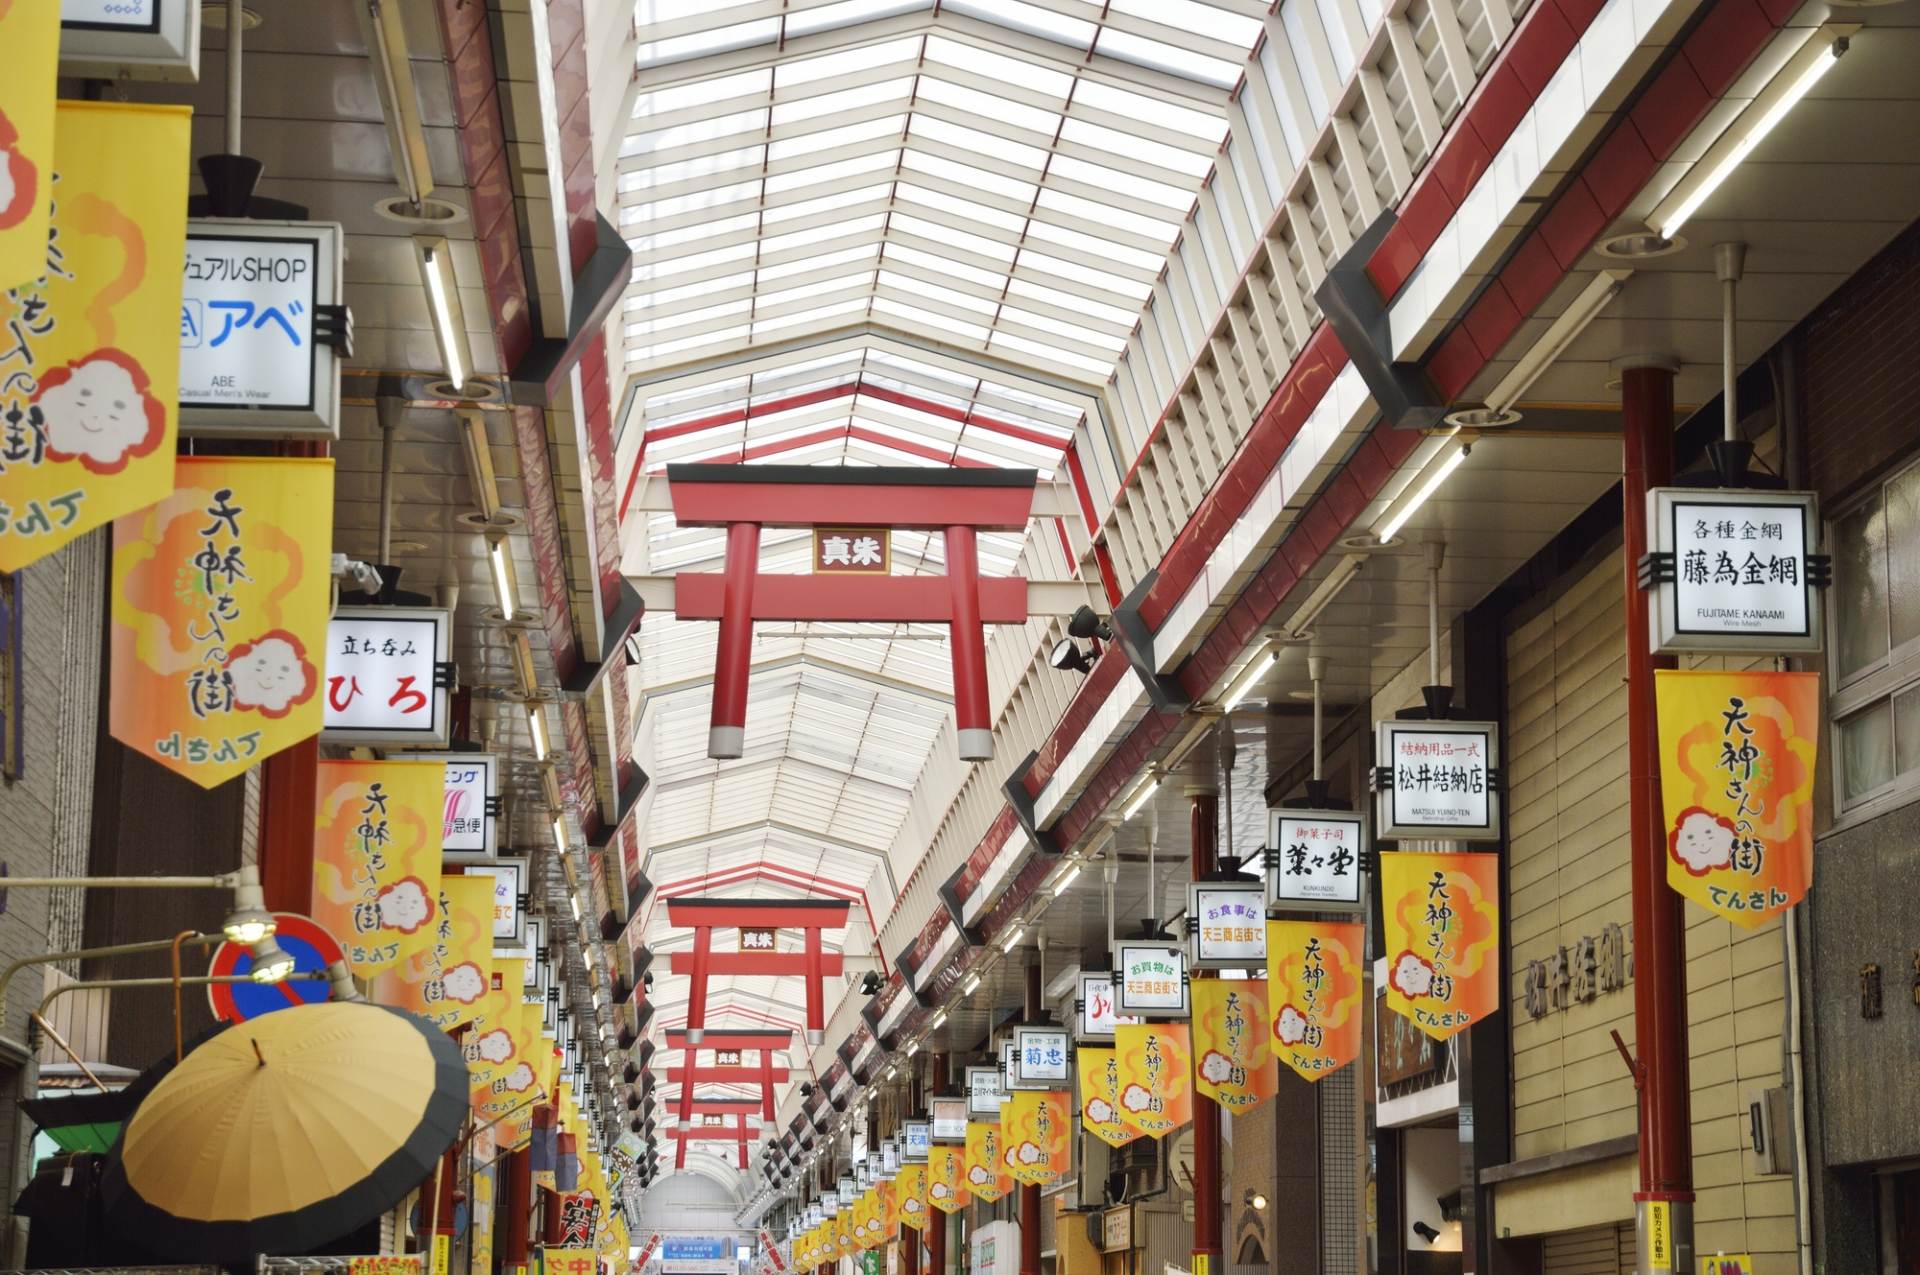 The longest shopping arcade in Japan, with a total length of about 2.6 km.